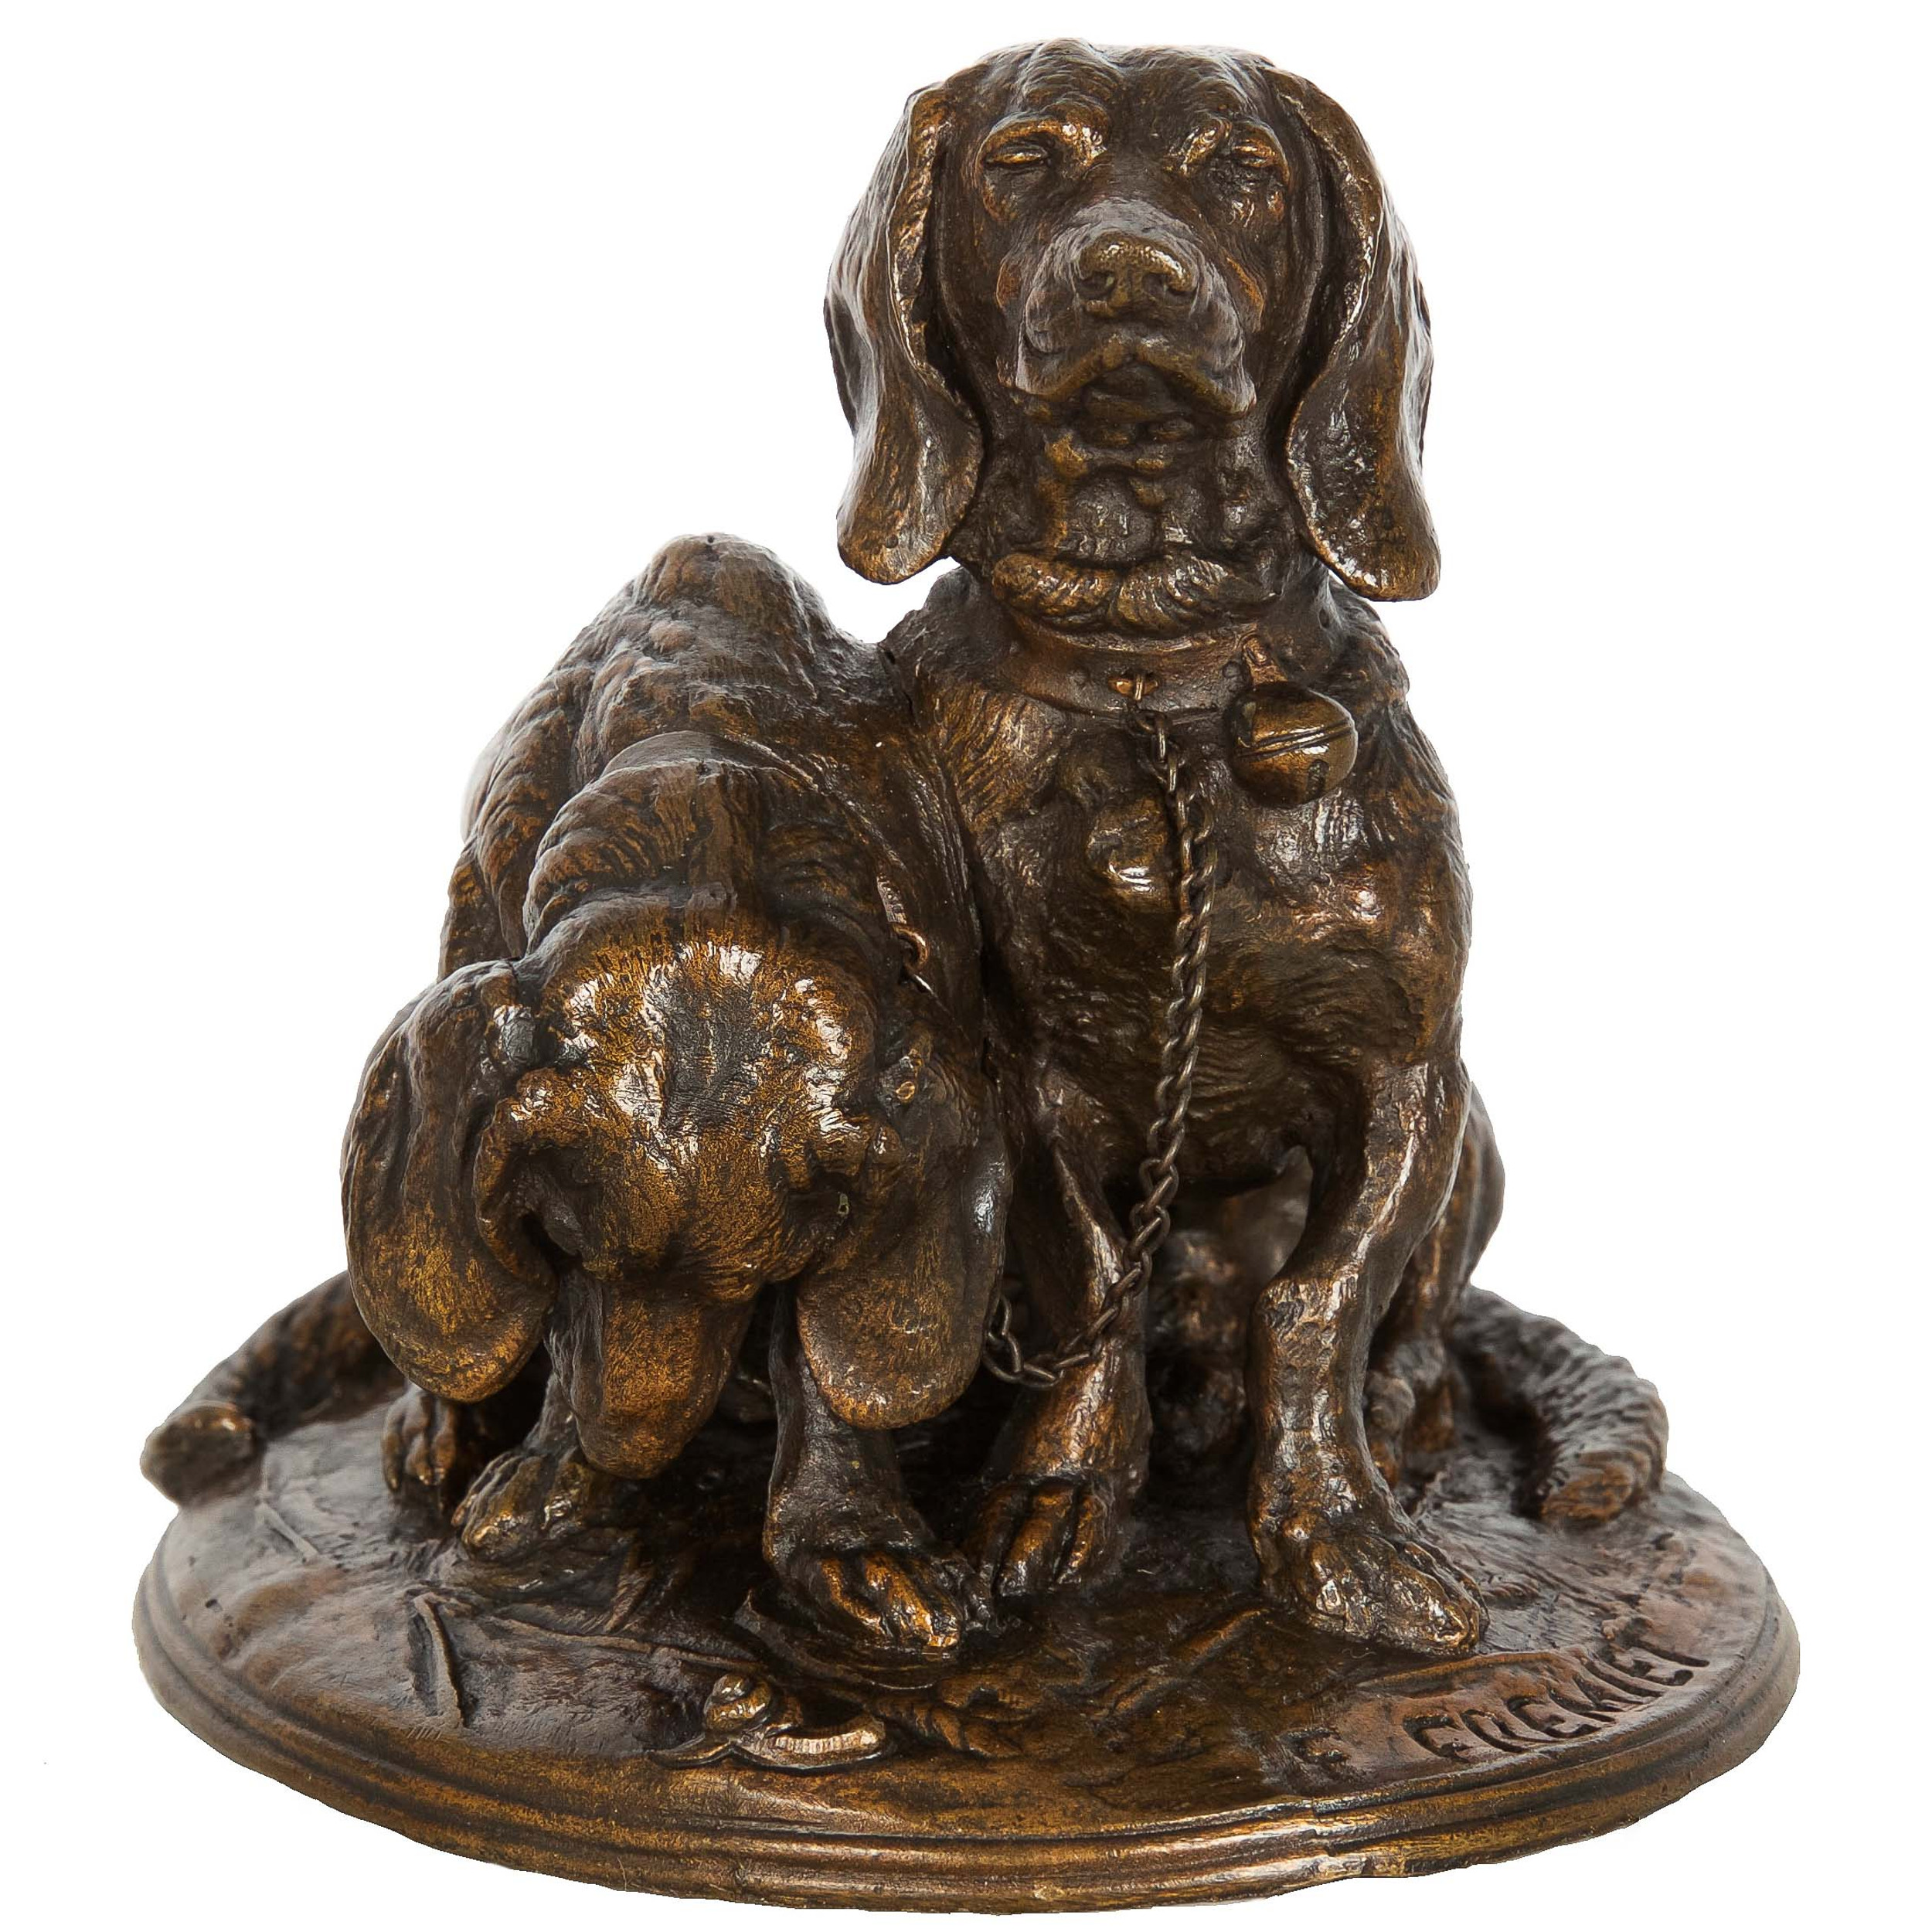 Basset Hound Statues for Sale